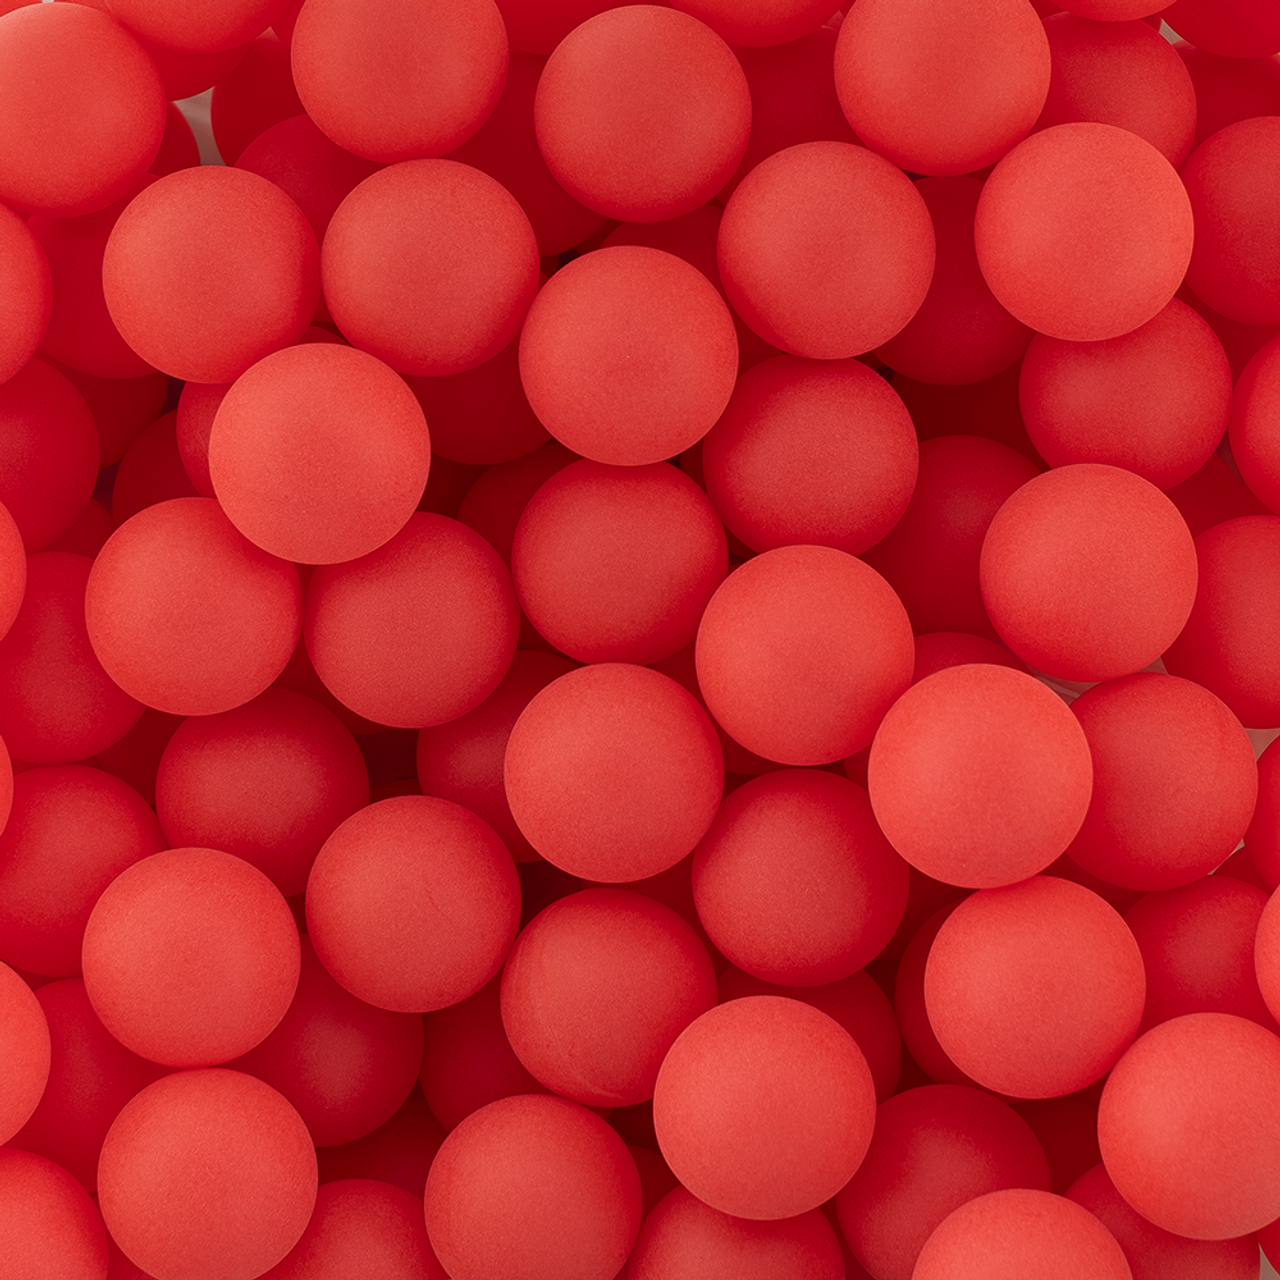 144 Ping Pong Balls - Red - 40mm size - Plastic Beer Pong Balls, Balls for  Carnival Games, Arts